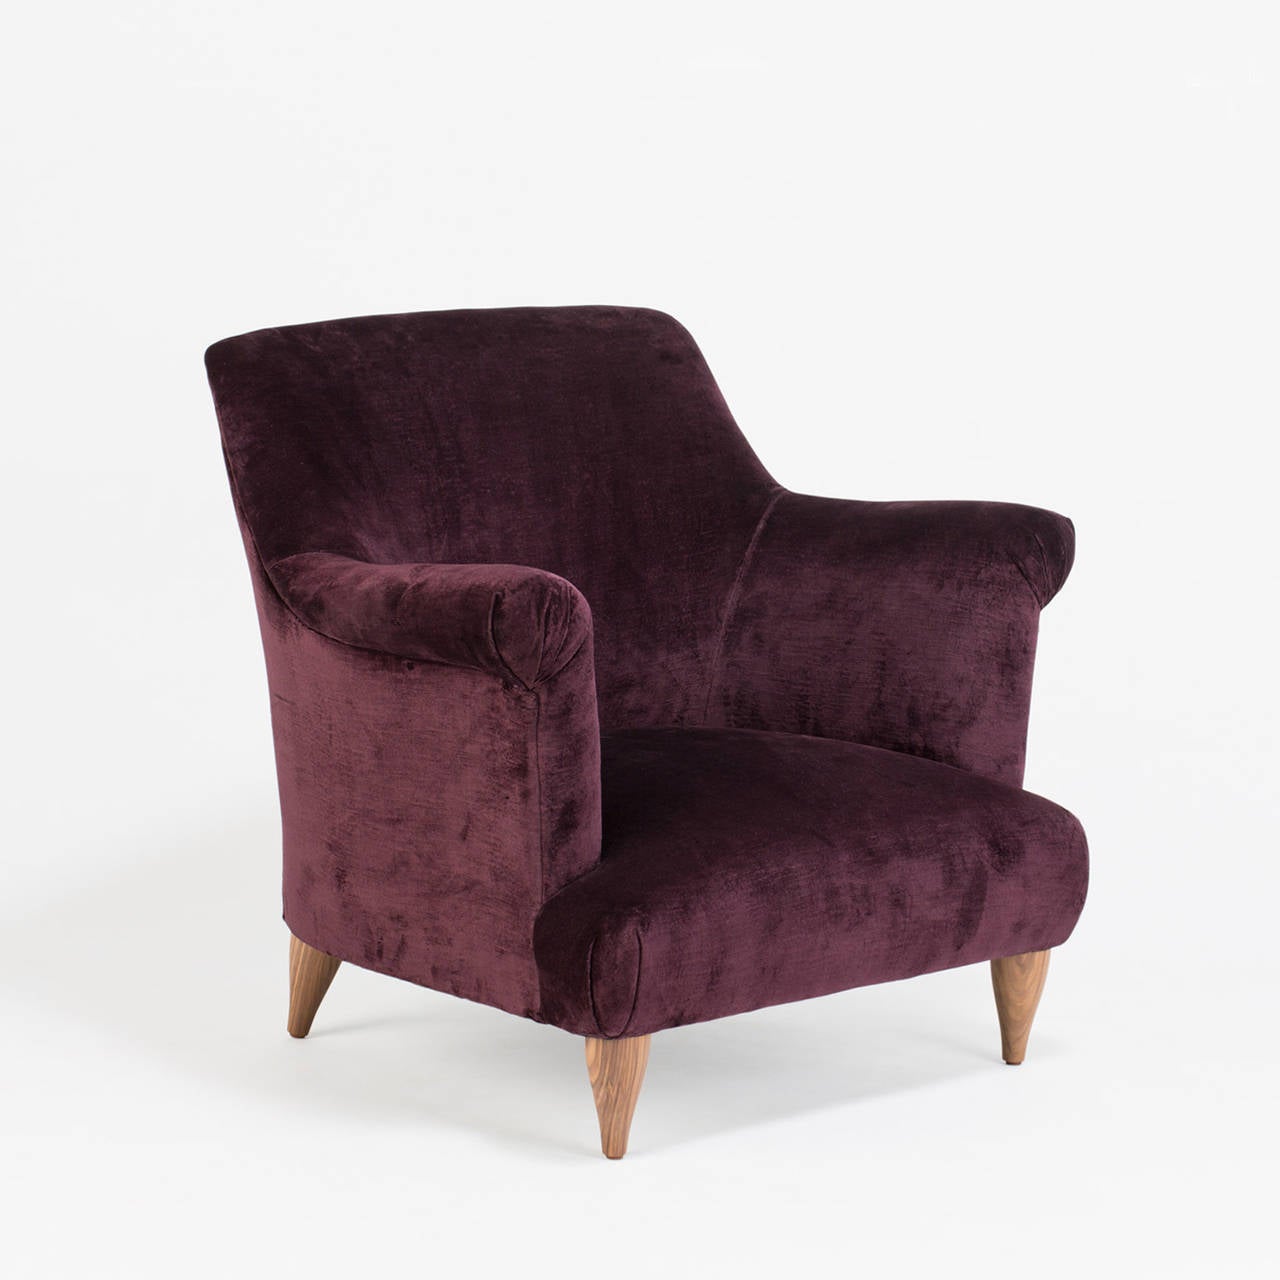 The Goddard armchair, designed by Russell Pinch for The Future Perfect, melds traditional elements with a contemporary, refined shape. Its sprung back and seat are designed to give maximum comfort and support whilst also delivering a light and